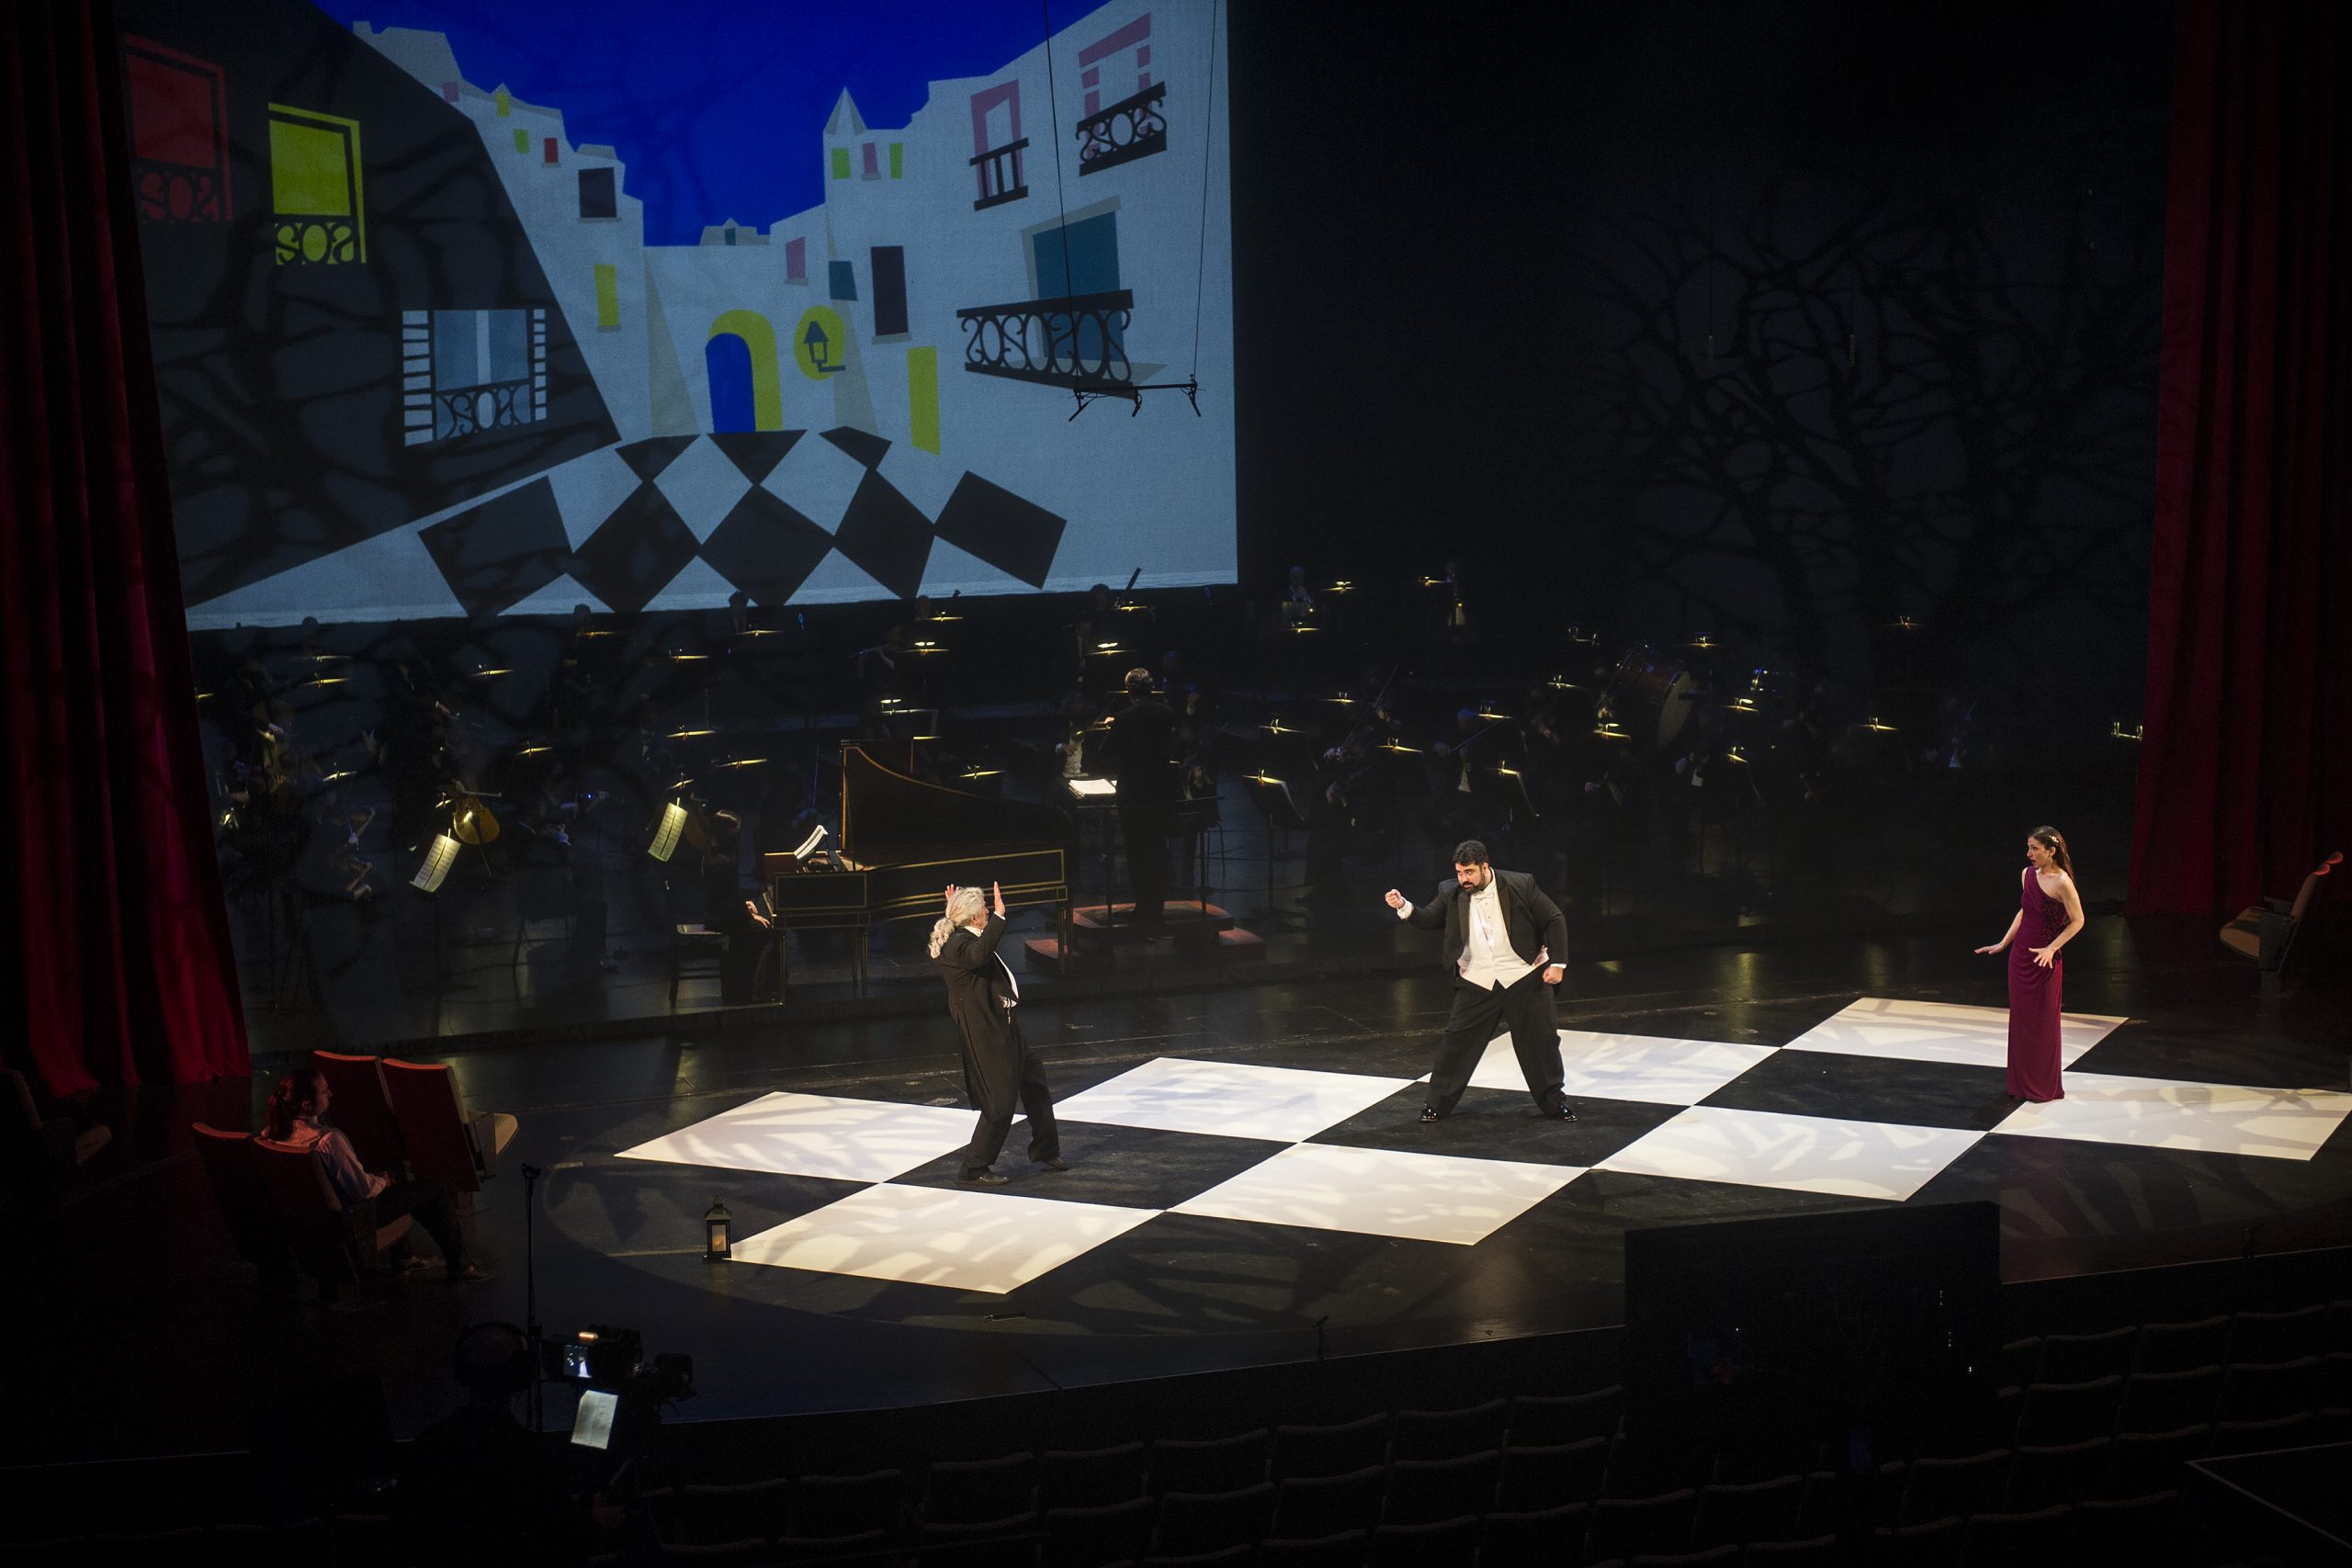 Rossini at play: an “ingenious staging” of Barber of Seville out of Opéra de Québec